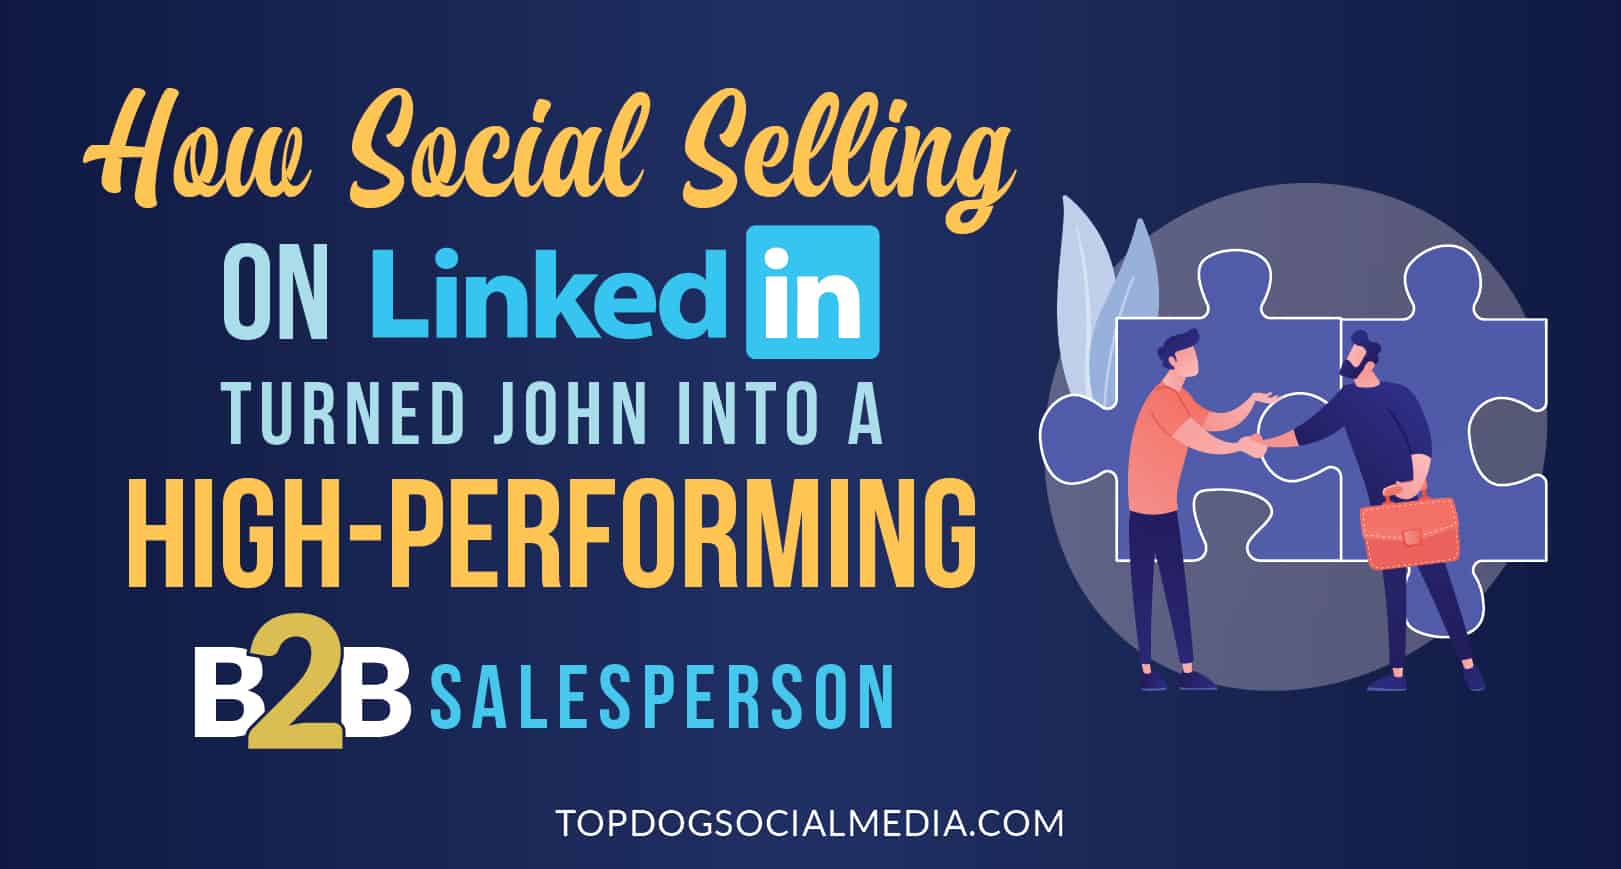 How Social Selling on LinkedIn Turned John into a High-Performing B2B Salesperson